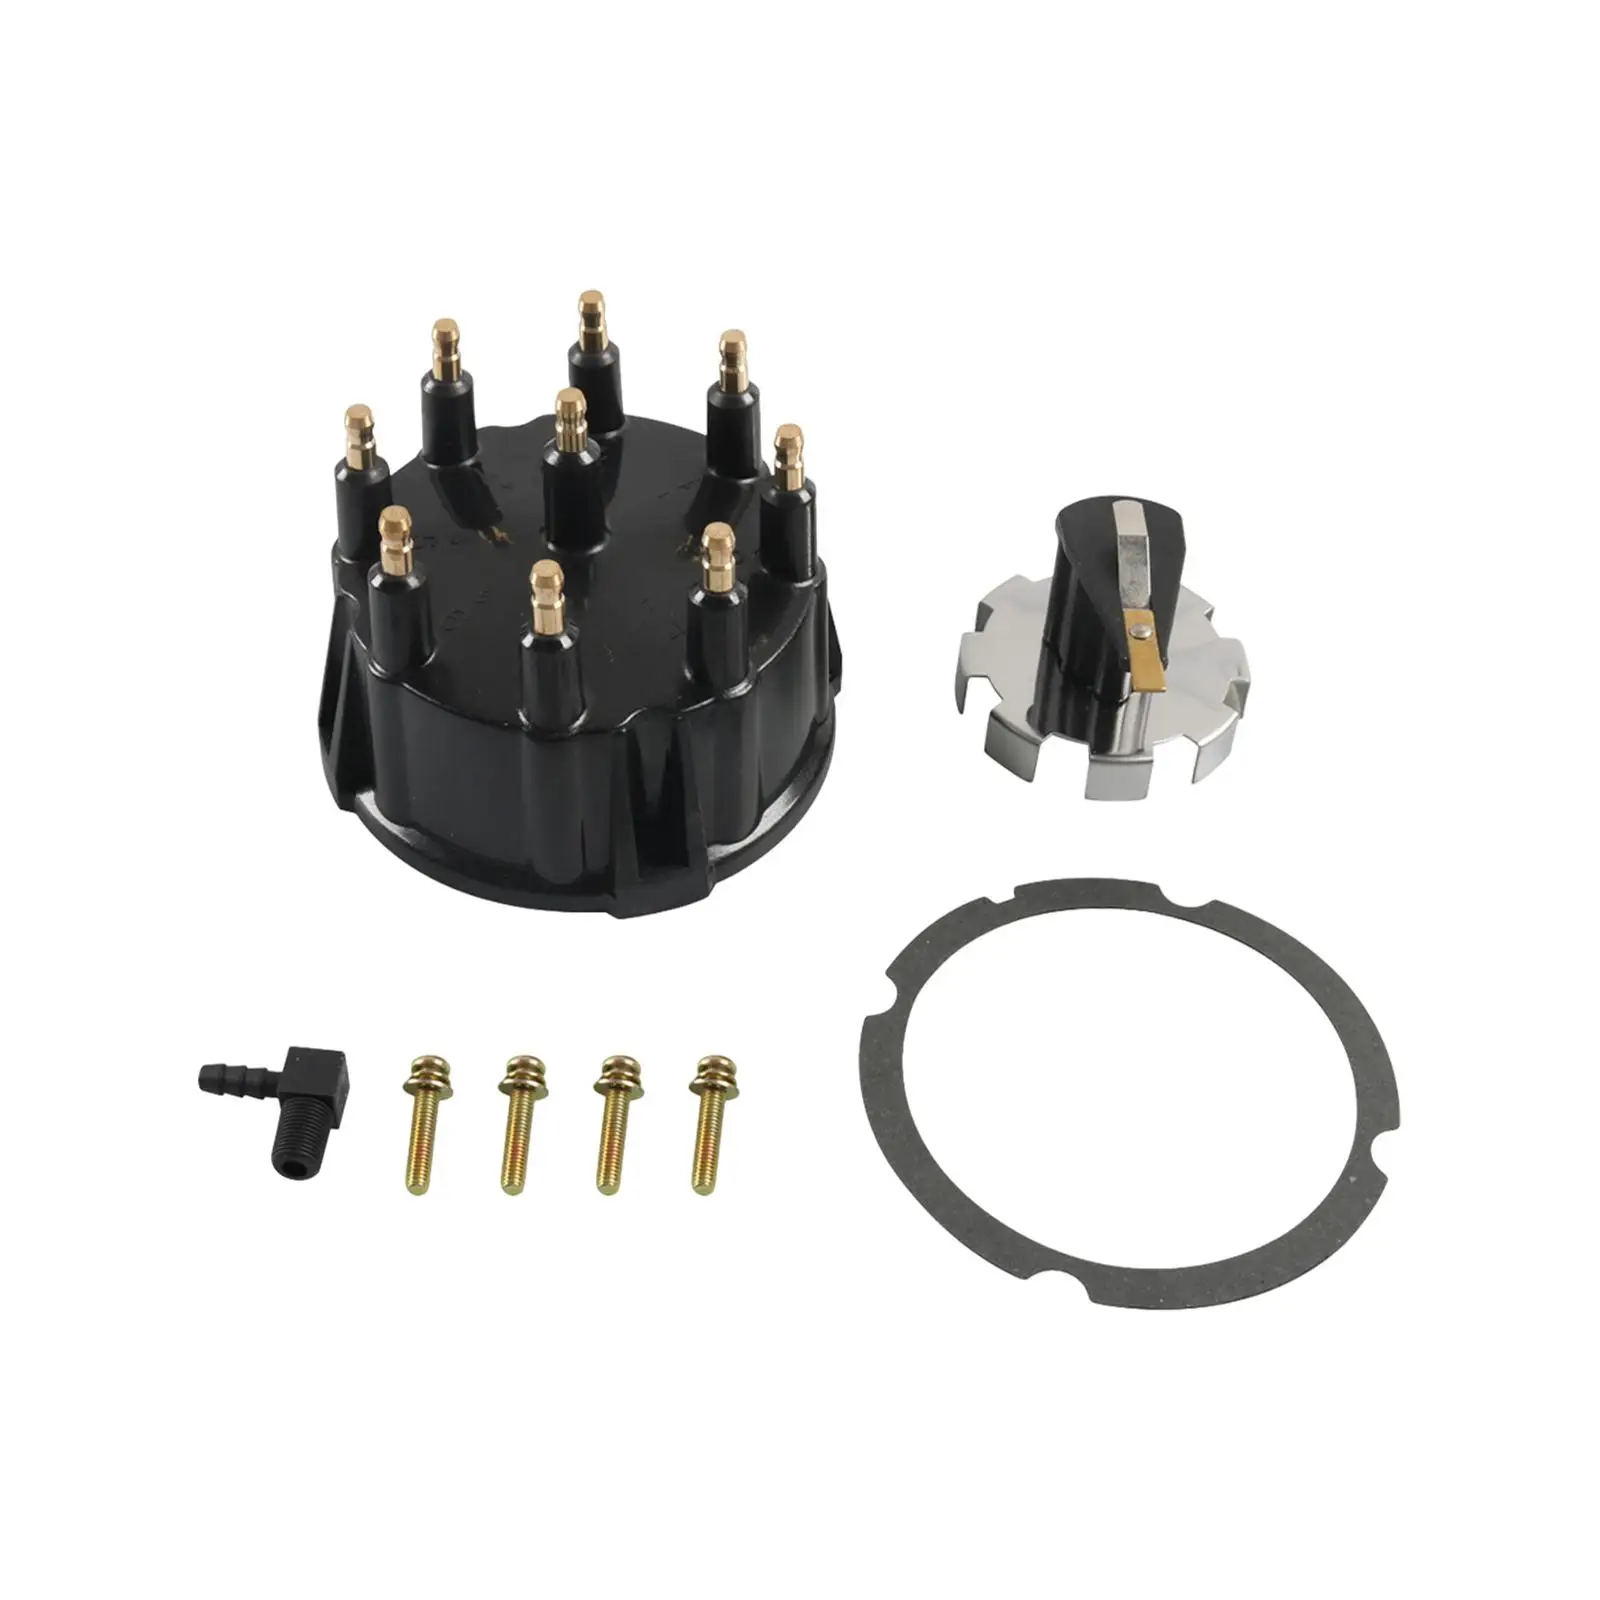 Distributor Cap Tune up Set Spare Parts High Performance 805759Q3 for All 5.0 5.7 7.4 8.2 V8 W/ Bolt Ignition 1980-2003